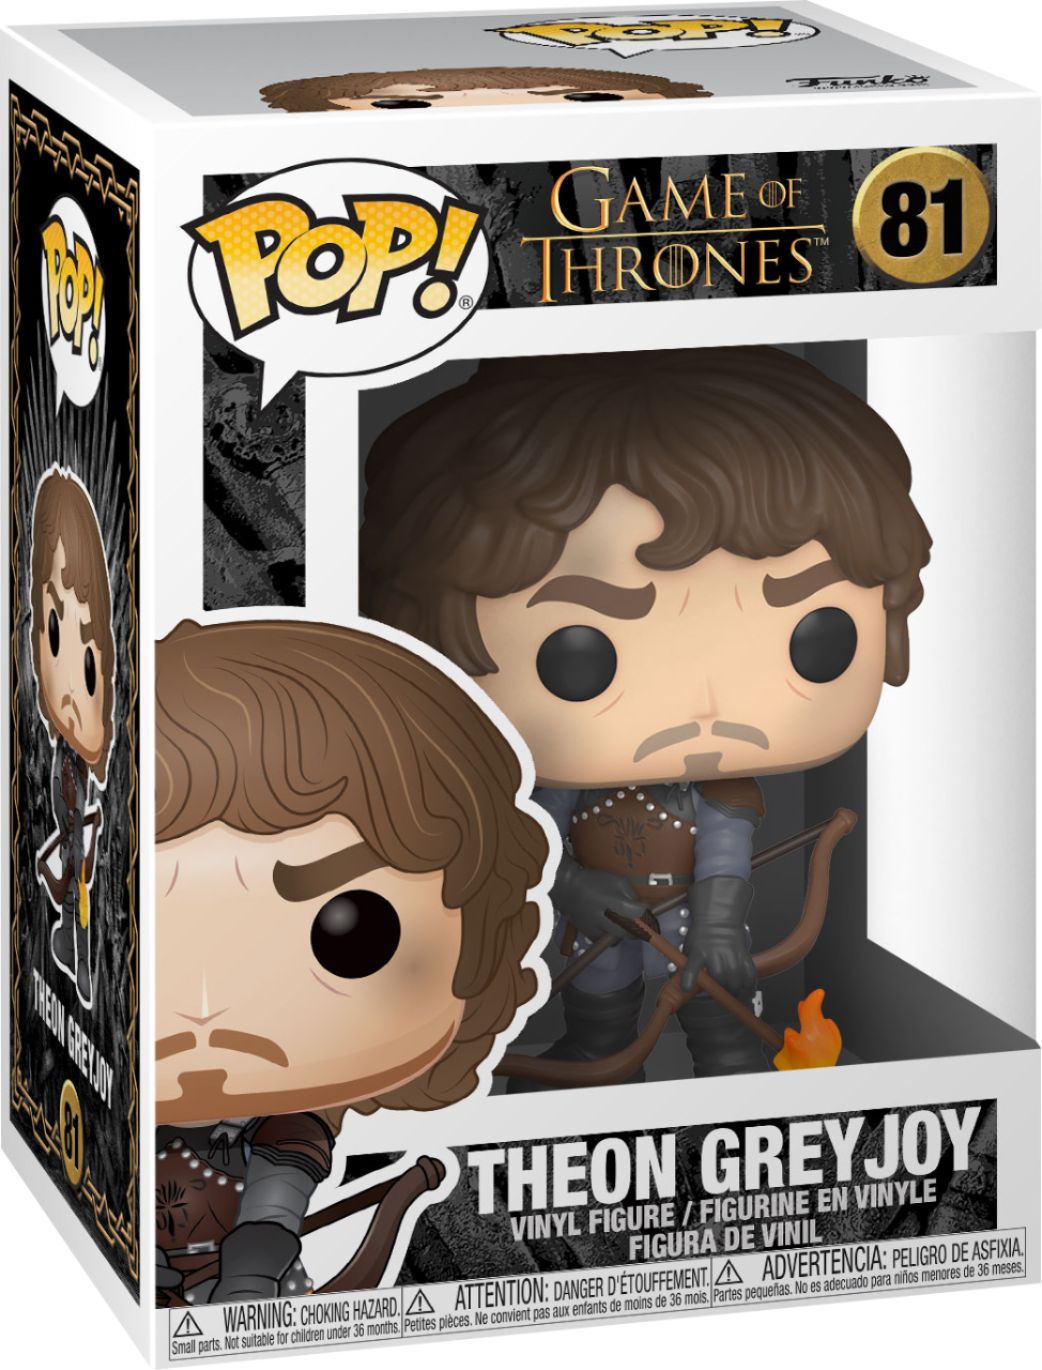 Theon With Flaming Arrows 81 44821in Stock for sale online Funko Pop TV Game of Thrones 